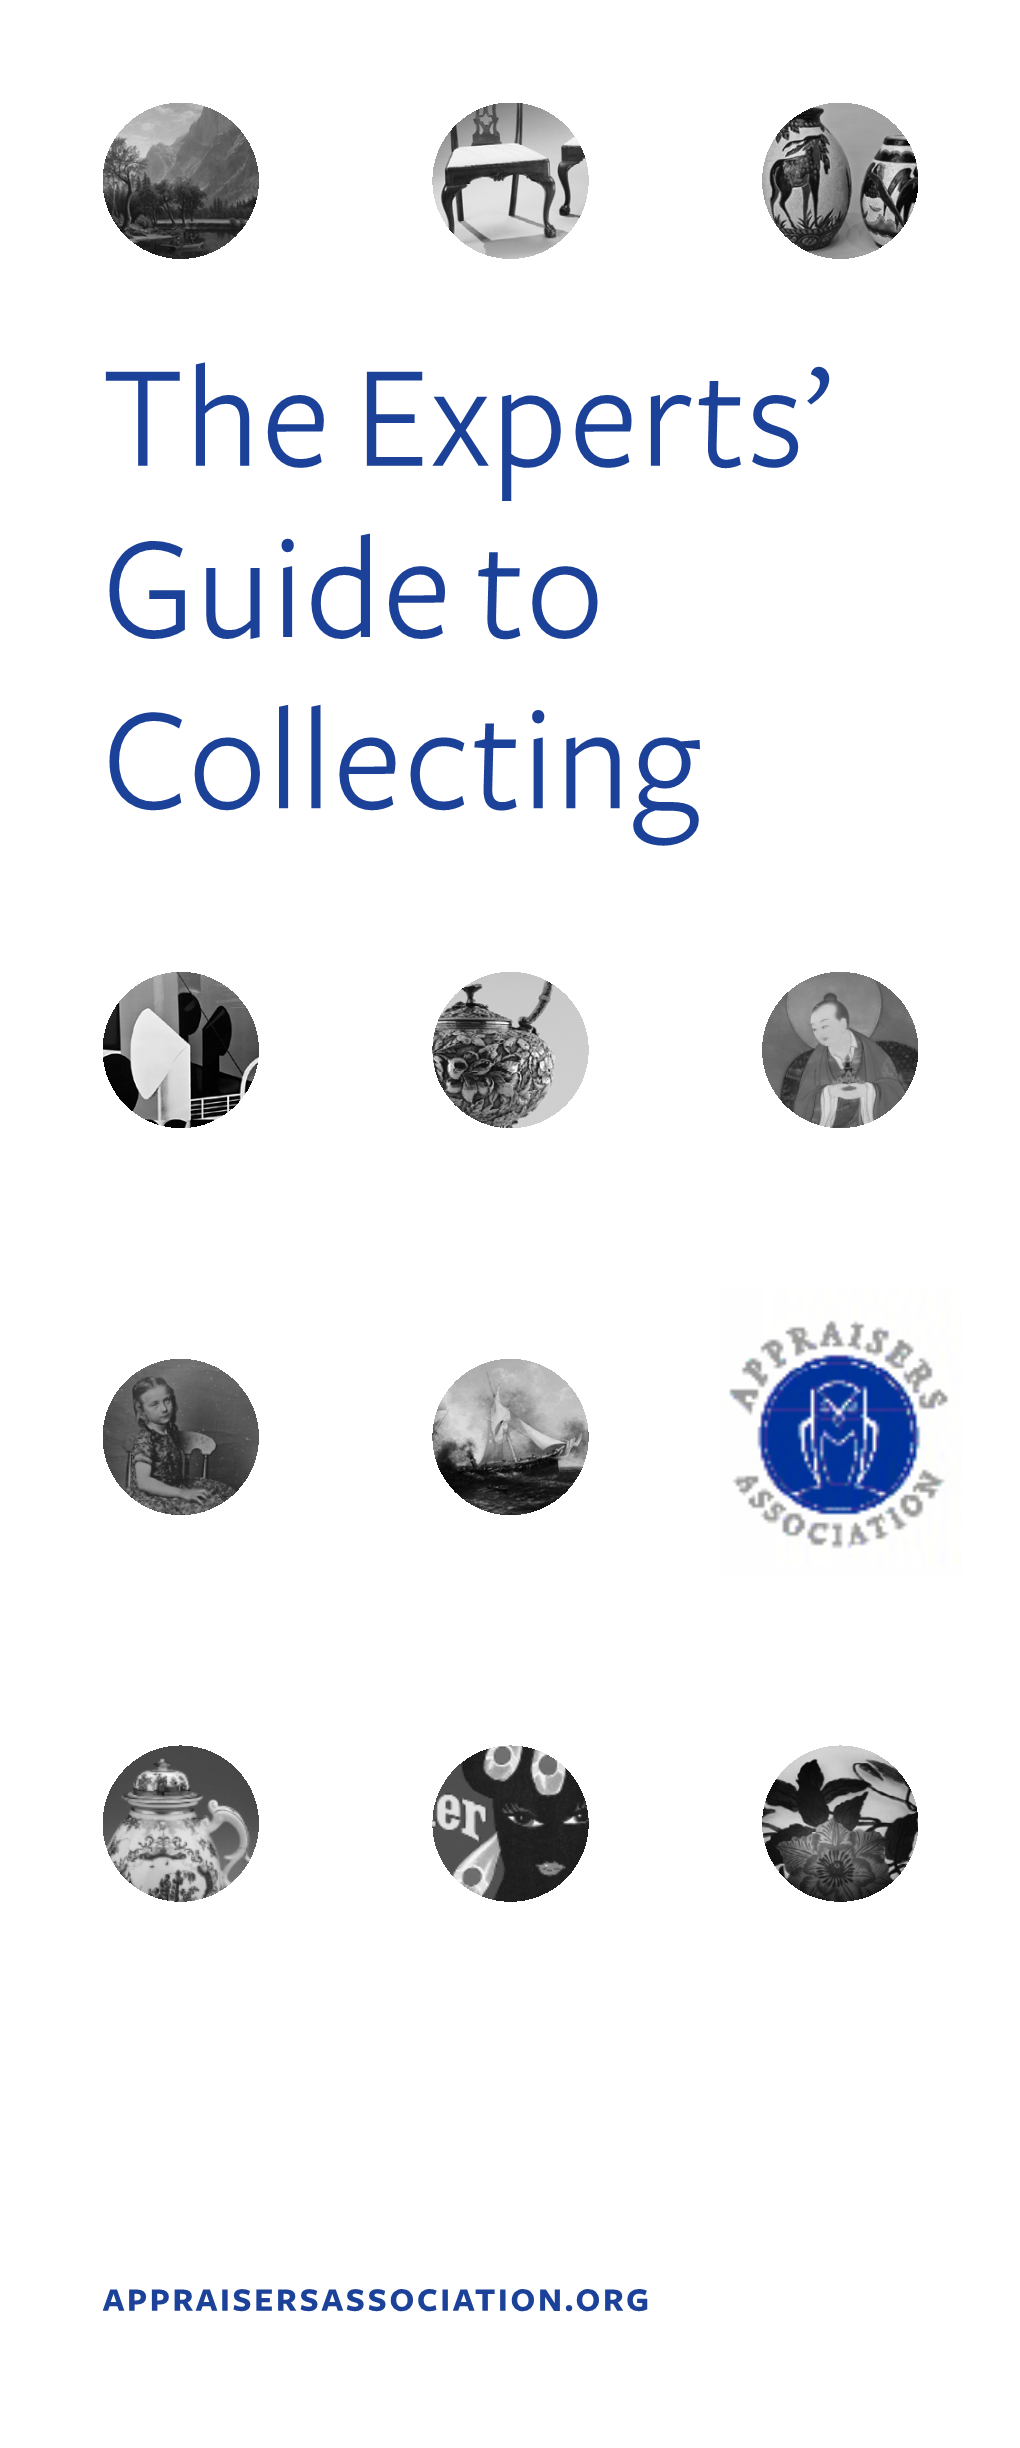 The Experts' Guide to Collecting